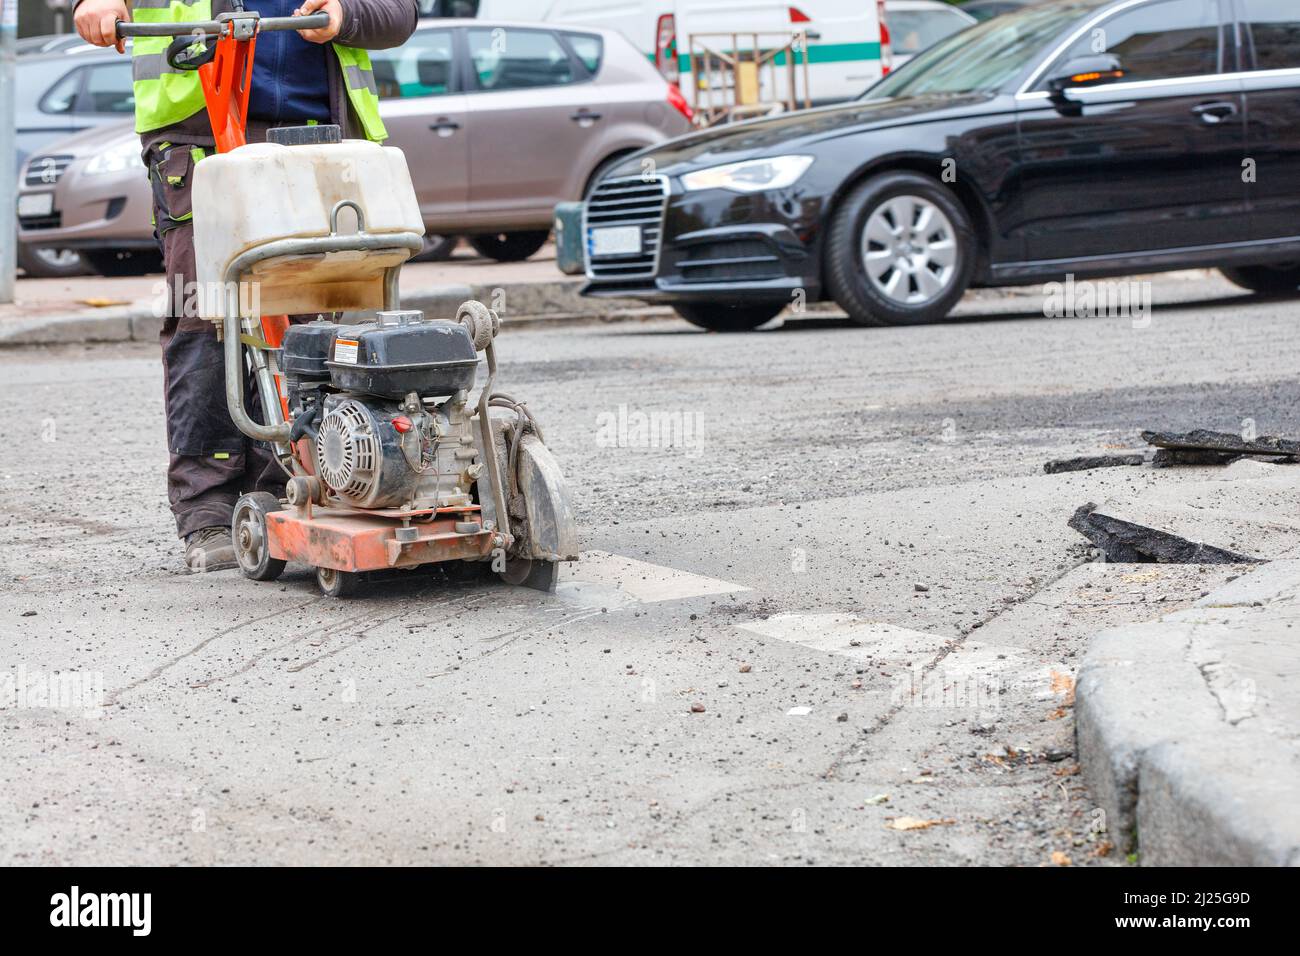 A petrol cutter cuts old asphalt with a diamond wheel, a road worker repairs the carriageway of a city road. Stock Photo